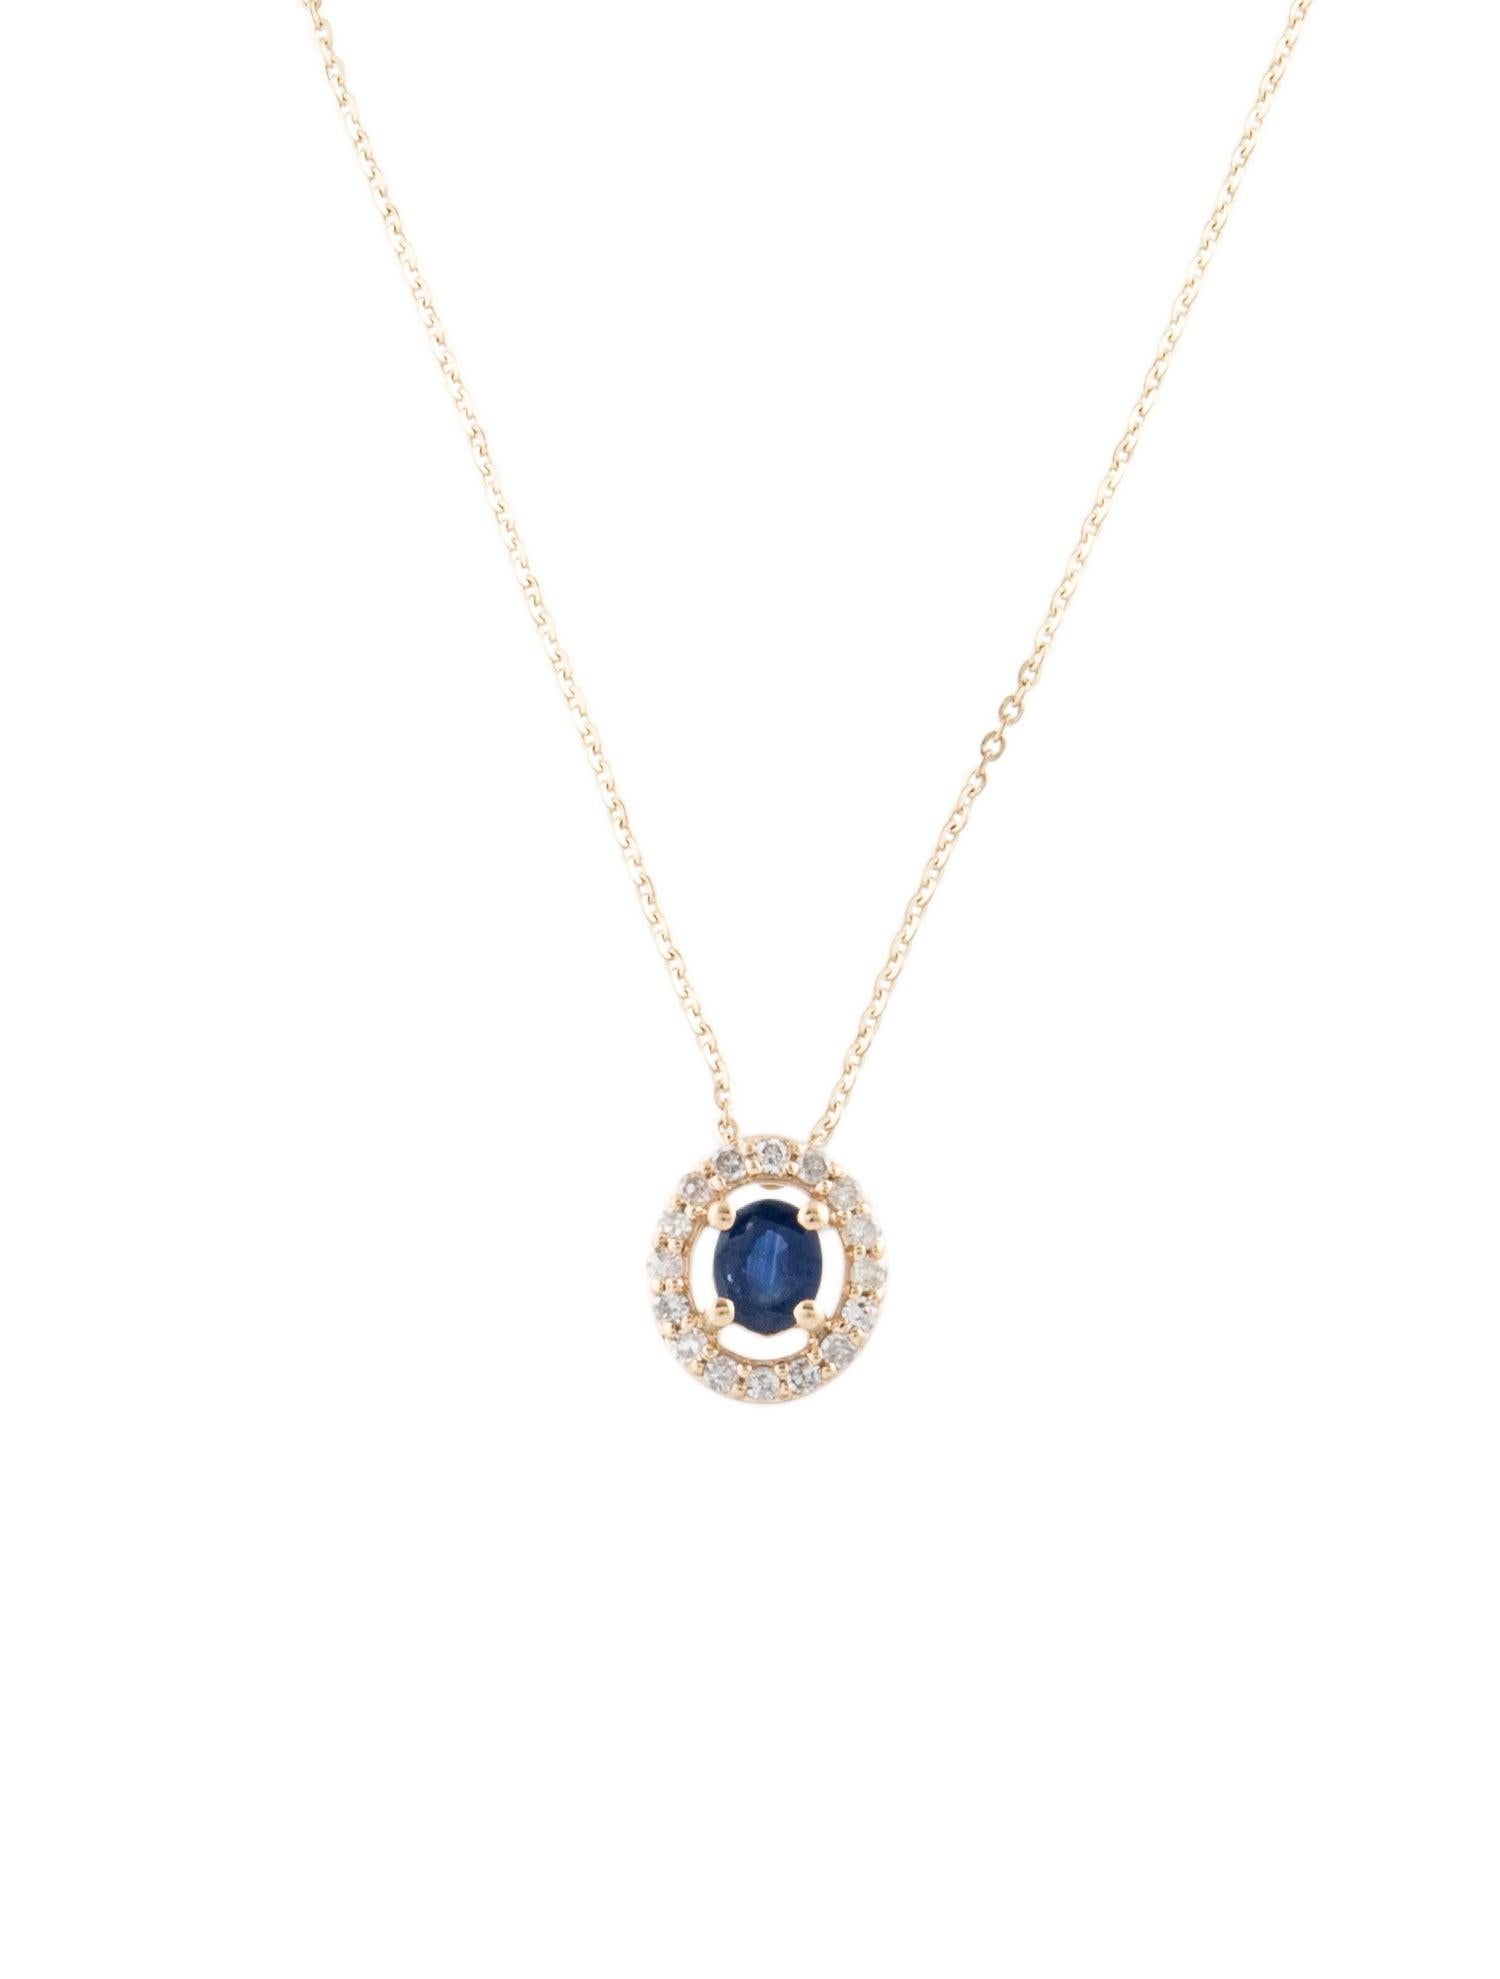 Immerse yourself in the enchanting allure of the ocean with our Beneath the Waves Sapphire and Diamond Pendant. This exquisite piece from Jeweltique's collection is a celebration of the mesmerizing beauty found beneath the ocean's surface.

Crafted